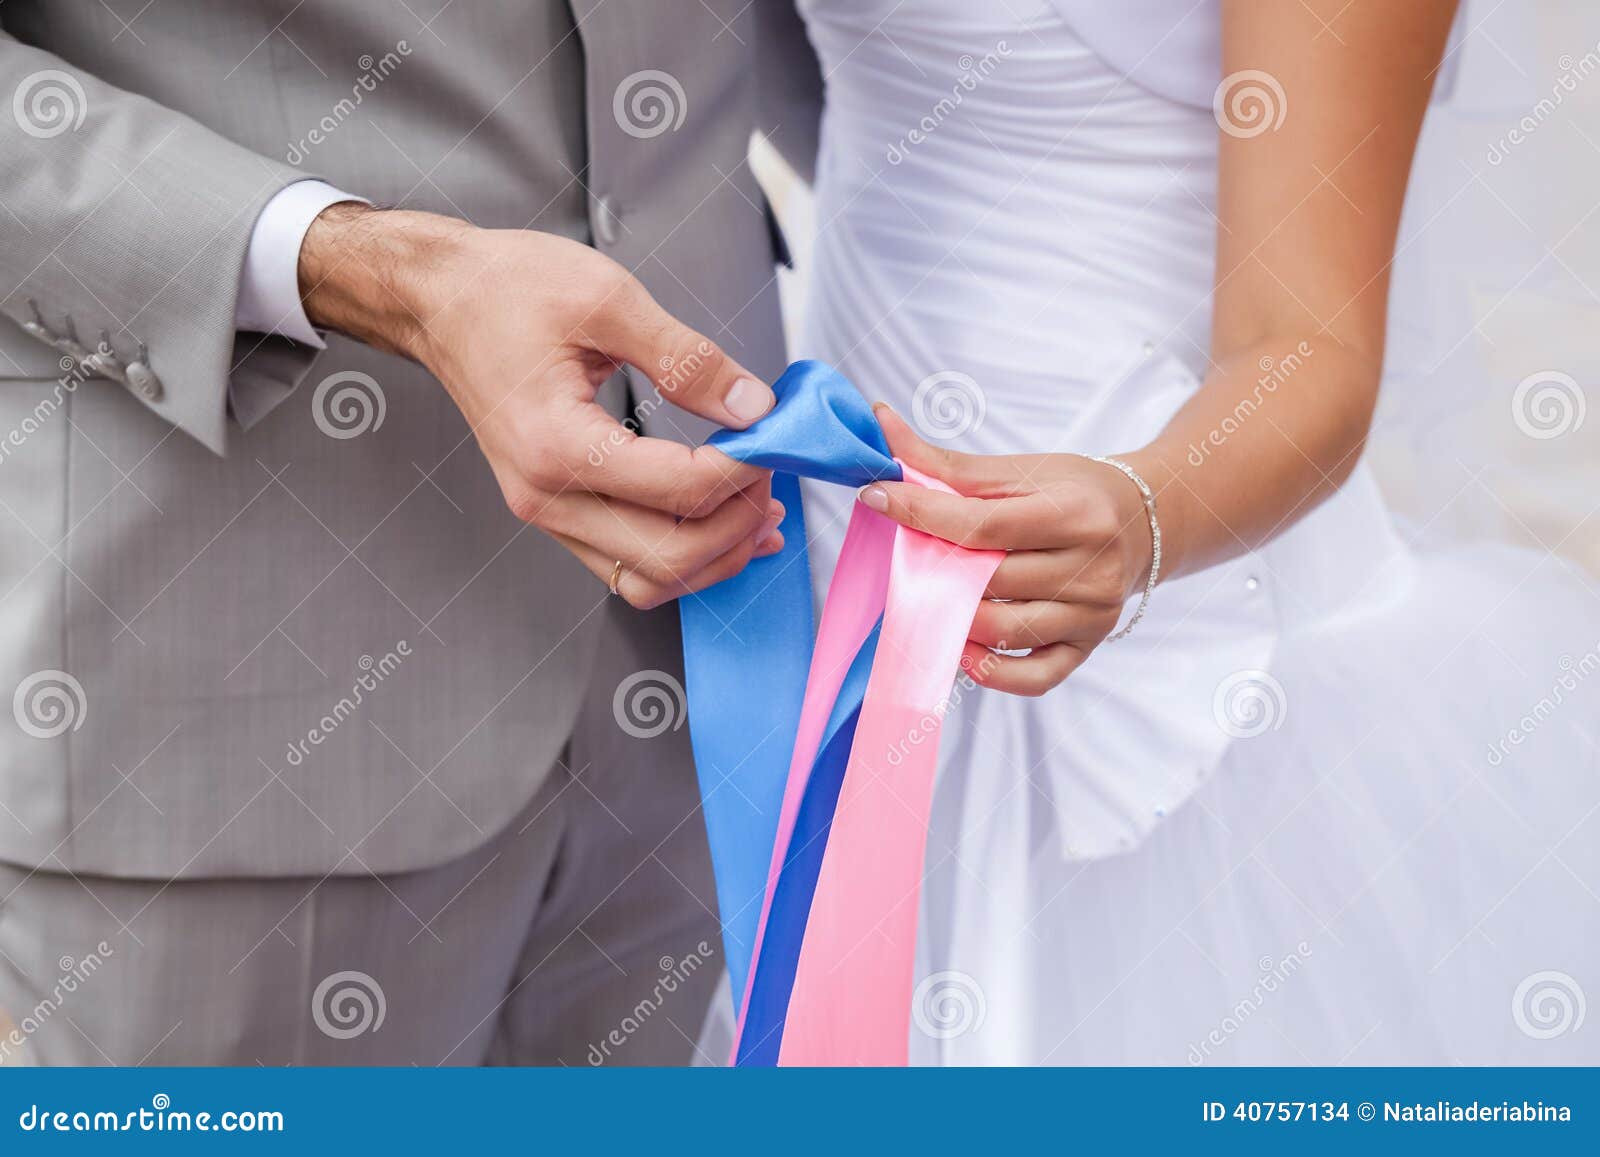 Just Married stock photo picture